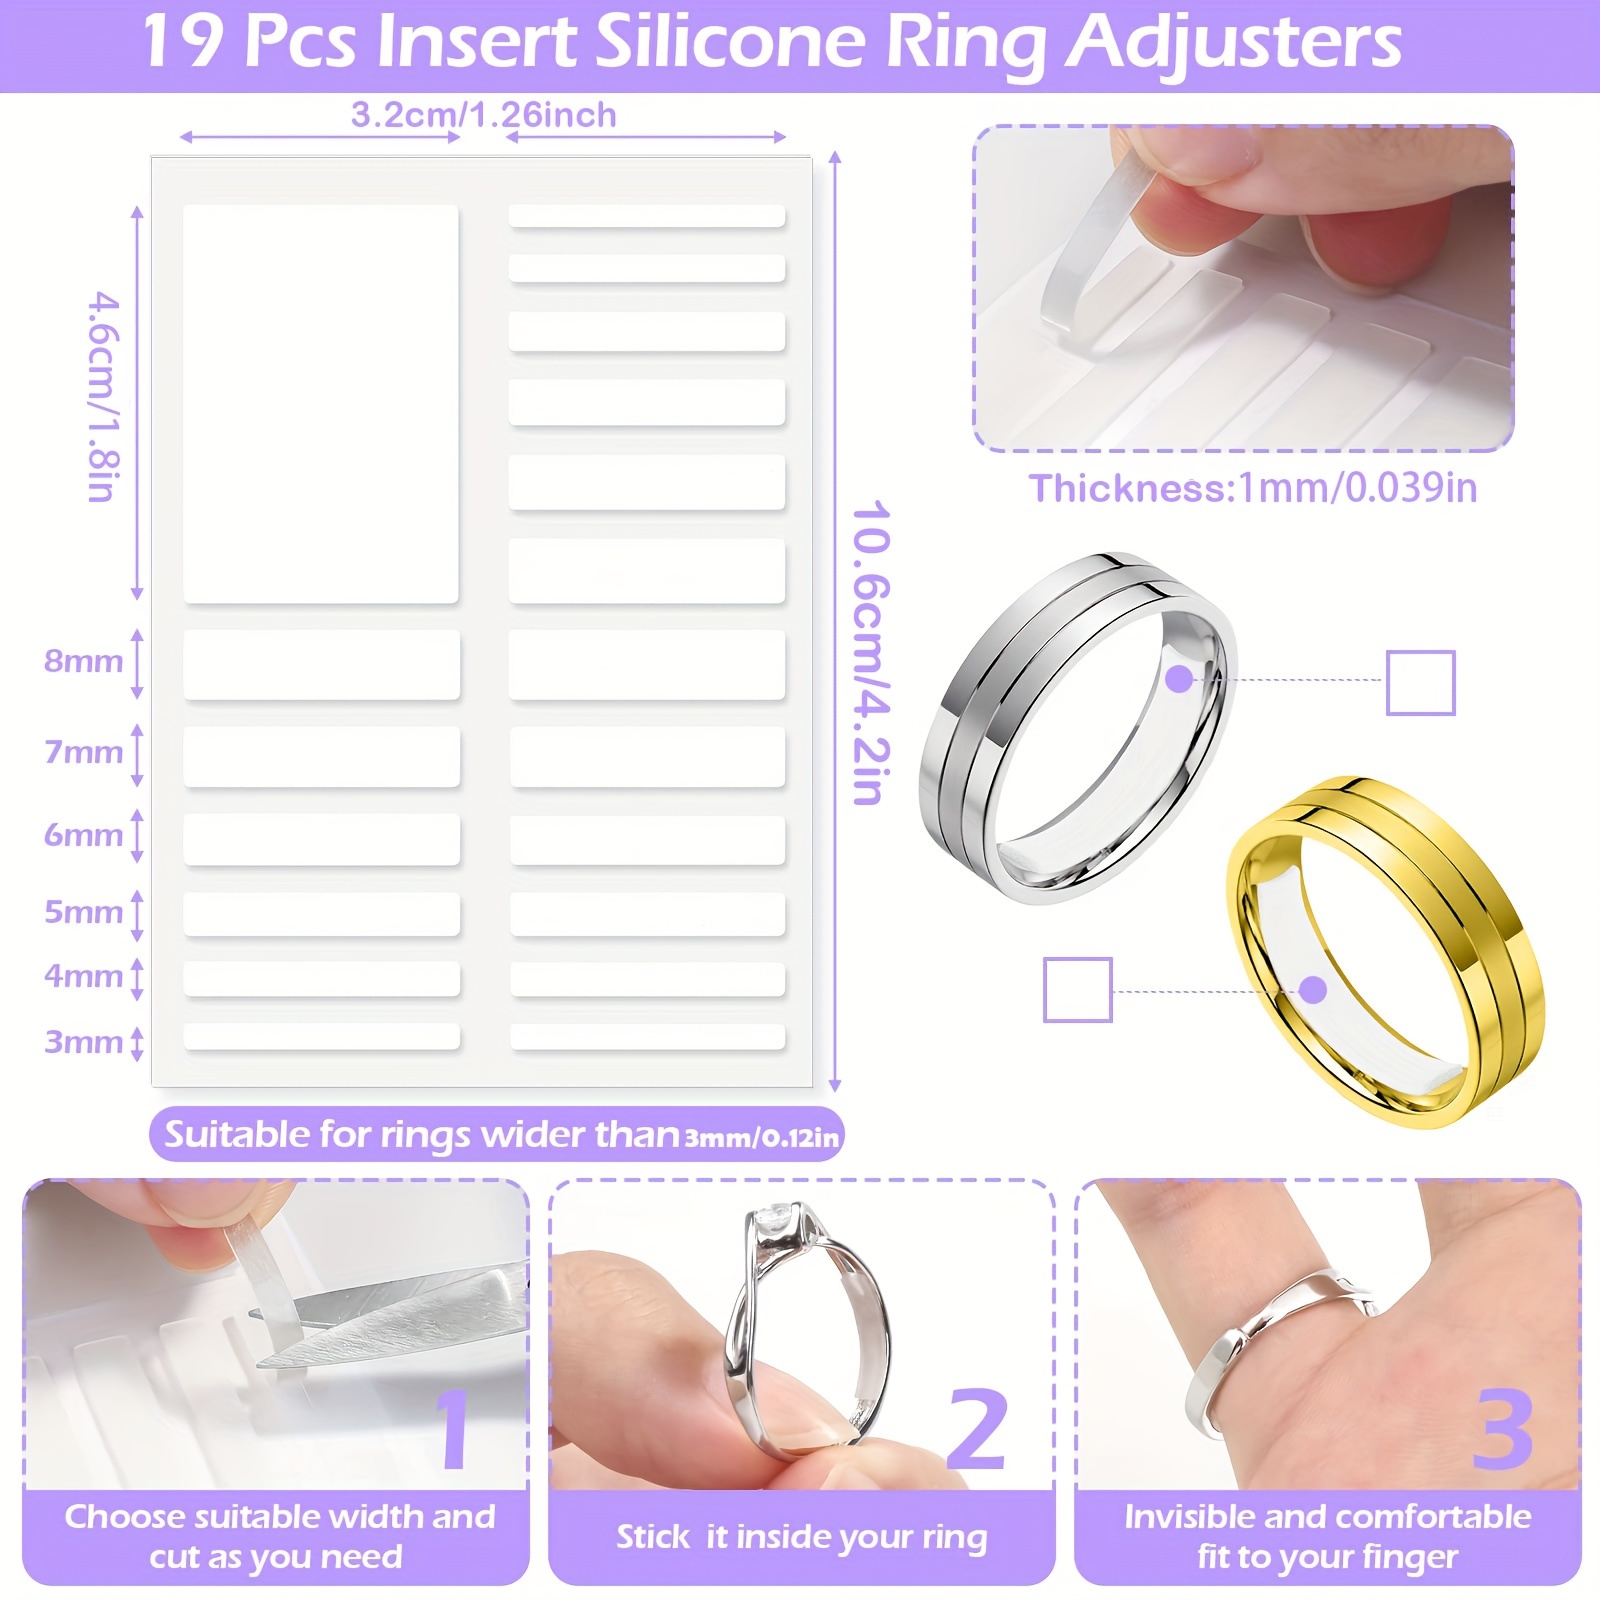 70 Pcs Ring Size Adjuster for Loose Rings with Ring Size Measuring Tool for Ring Adjuster, Plug-In Invisible Ring Spiral Silicone Tightener with Wome